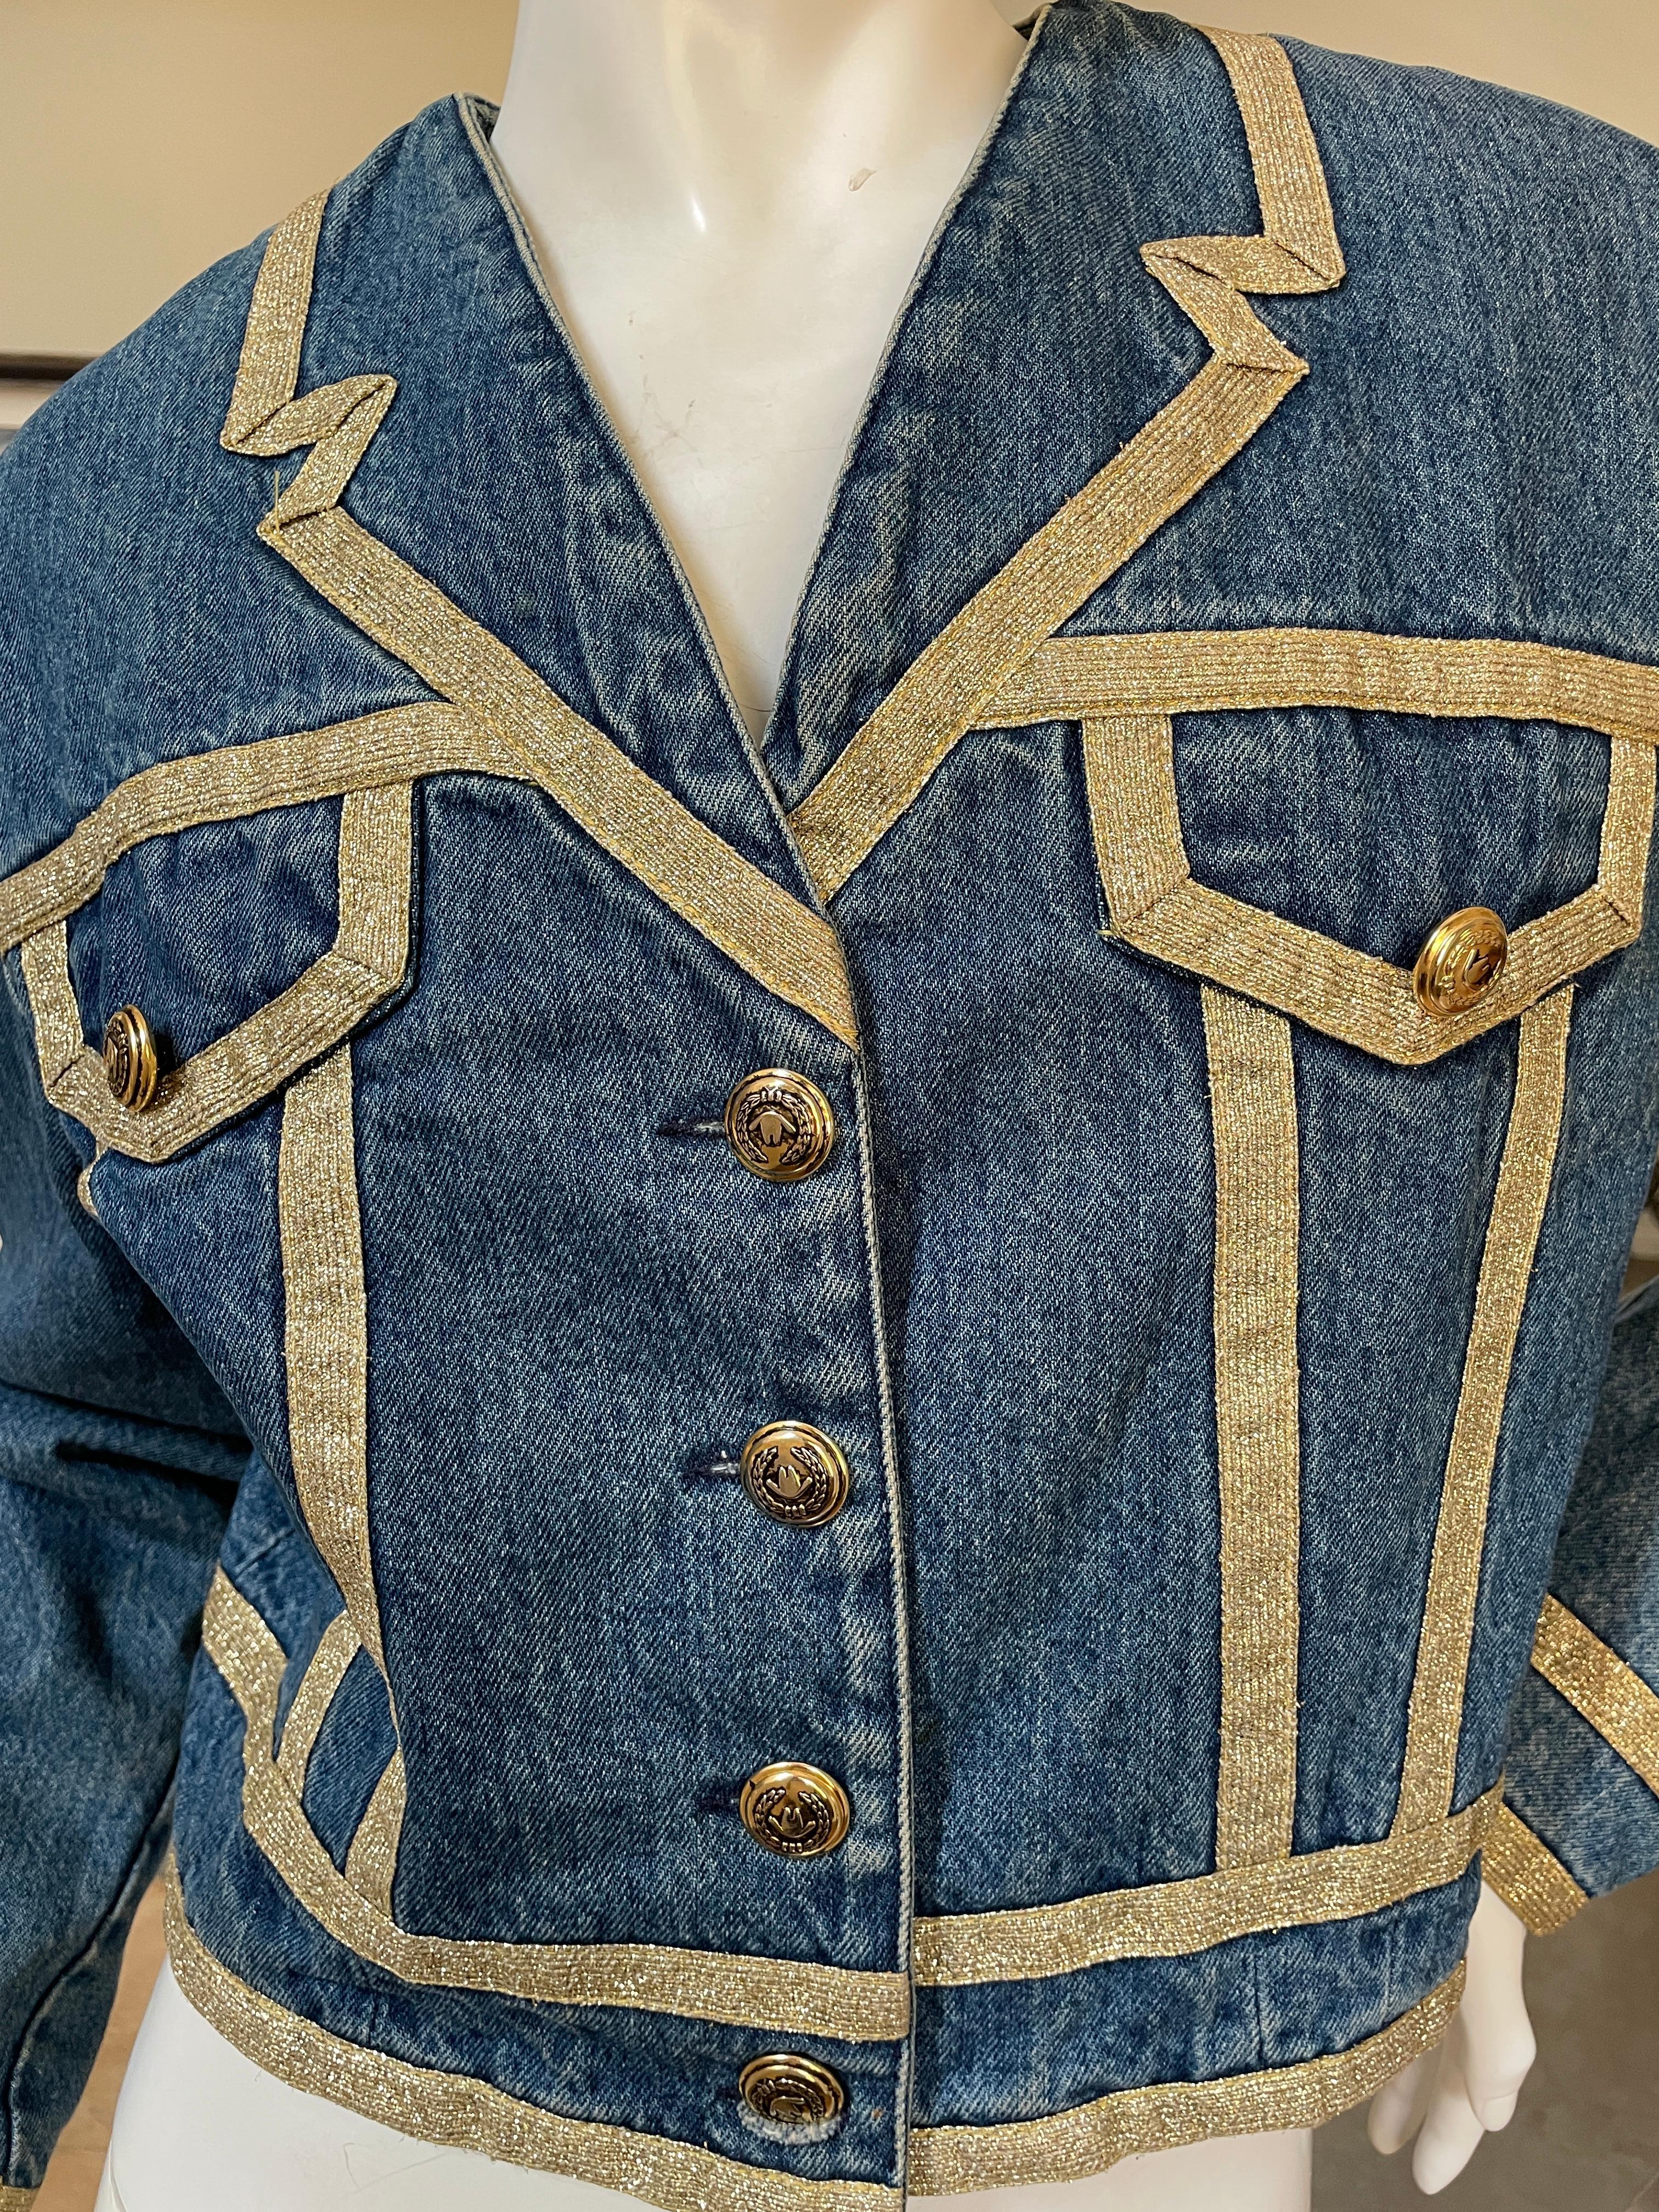 Moschino Jeans Vintage Denim Jacket with Trompe l'oeil Gold Trim Lapels In Excellent Condition For Sale In Cloverdale, CA